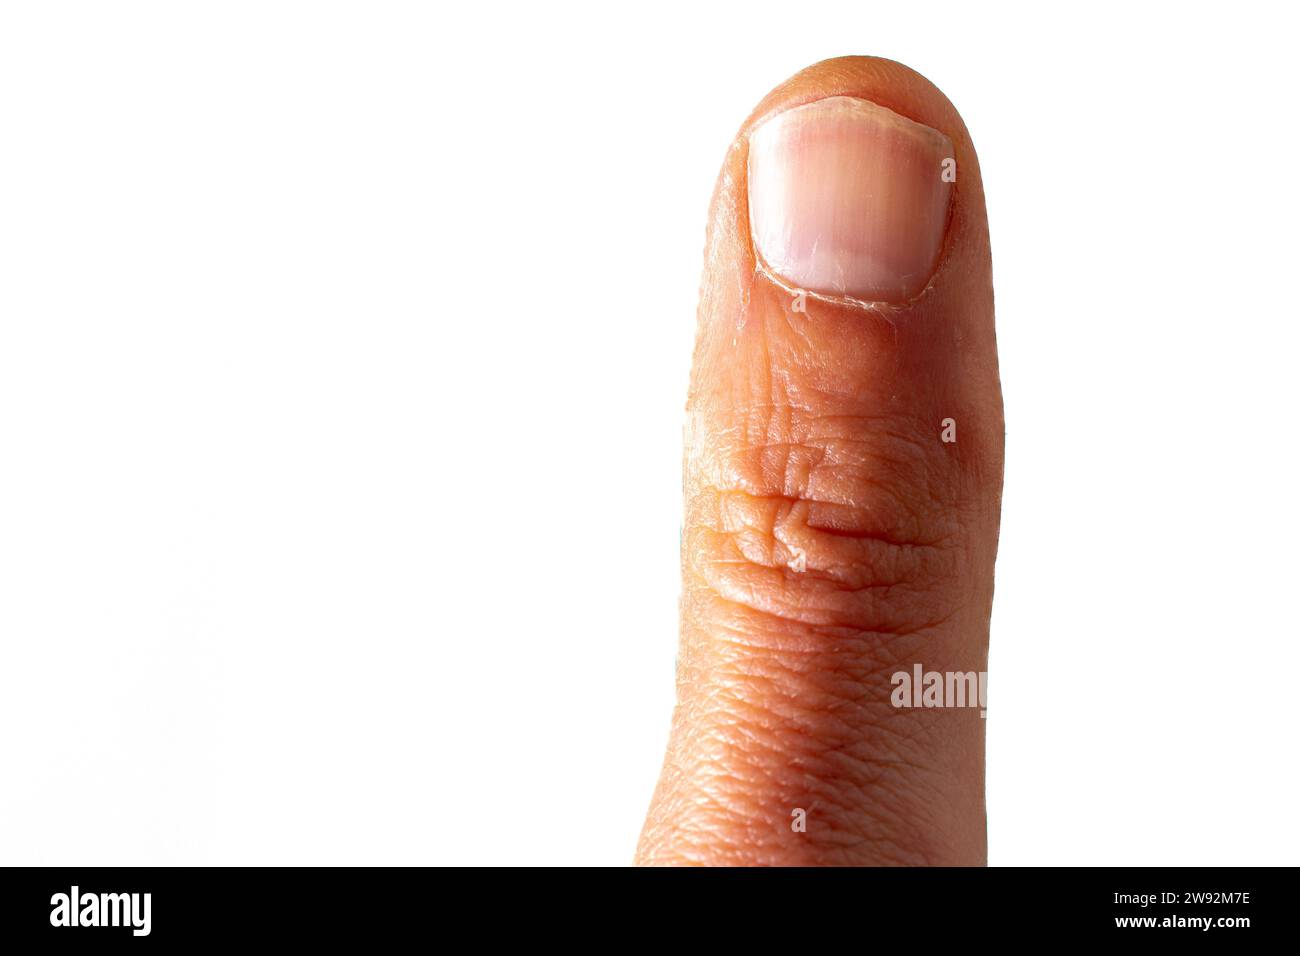 thumb of human hand with nail bitten by teeth under white background Stock Photo